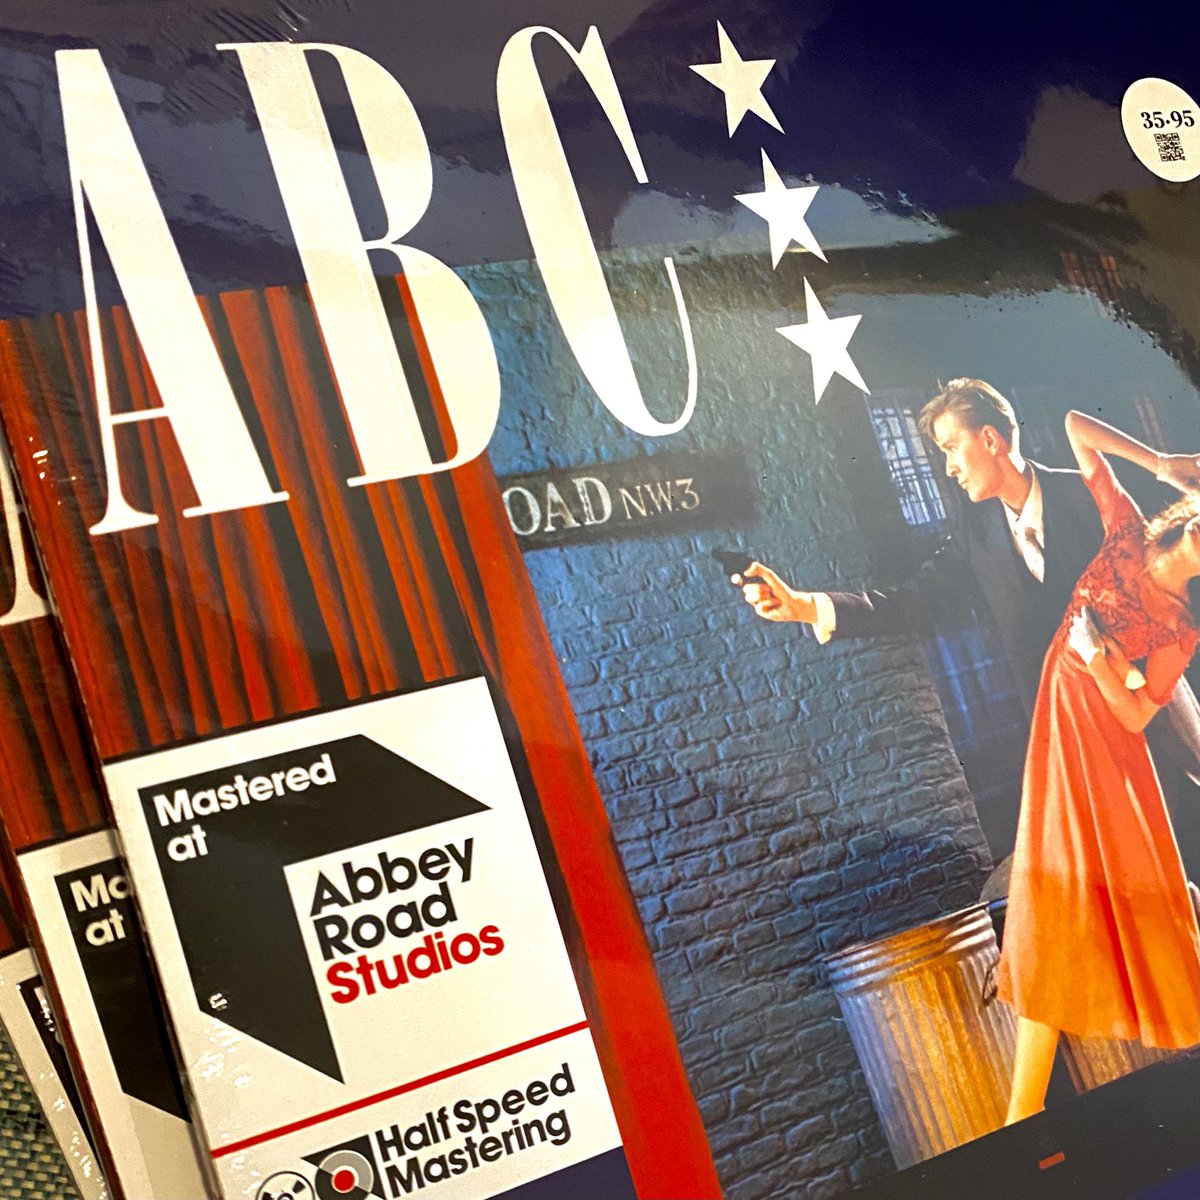 We still have a few copies of this classic #abc album at £35.95.

#TheLexiconOfLove #2023 #40thanniversary #vinyl #HalfSpeedMastered #abbeyroadstudios